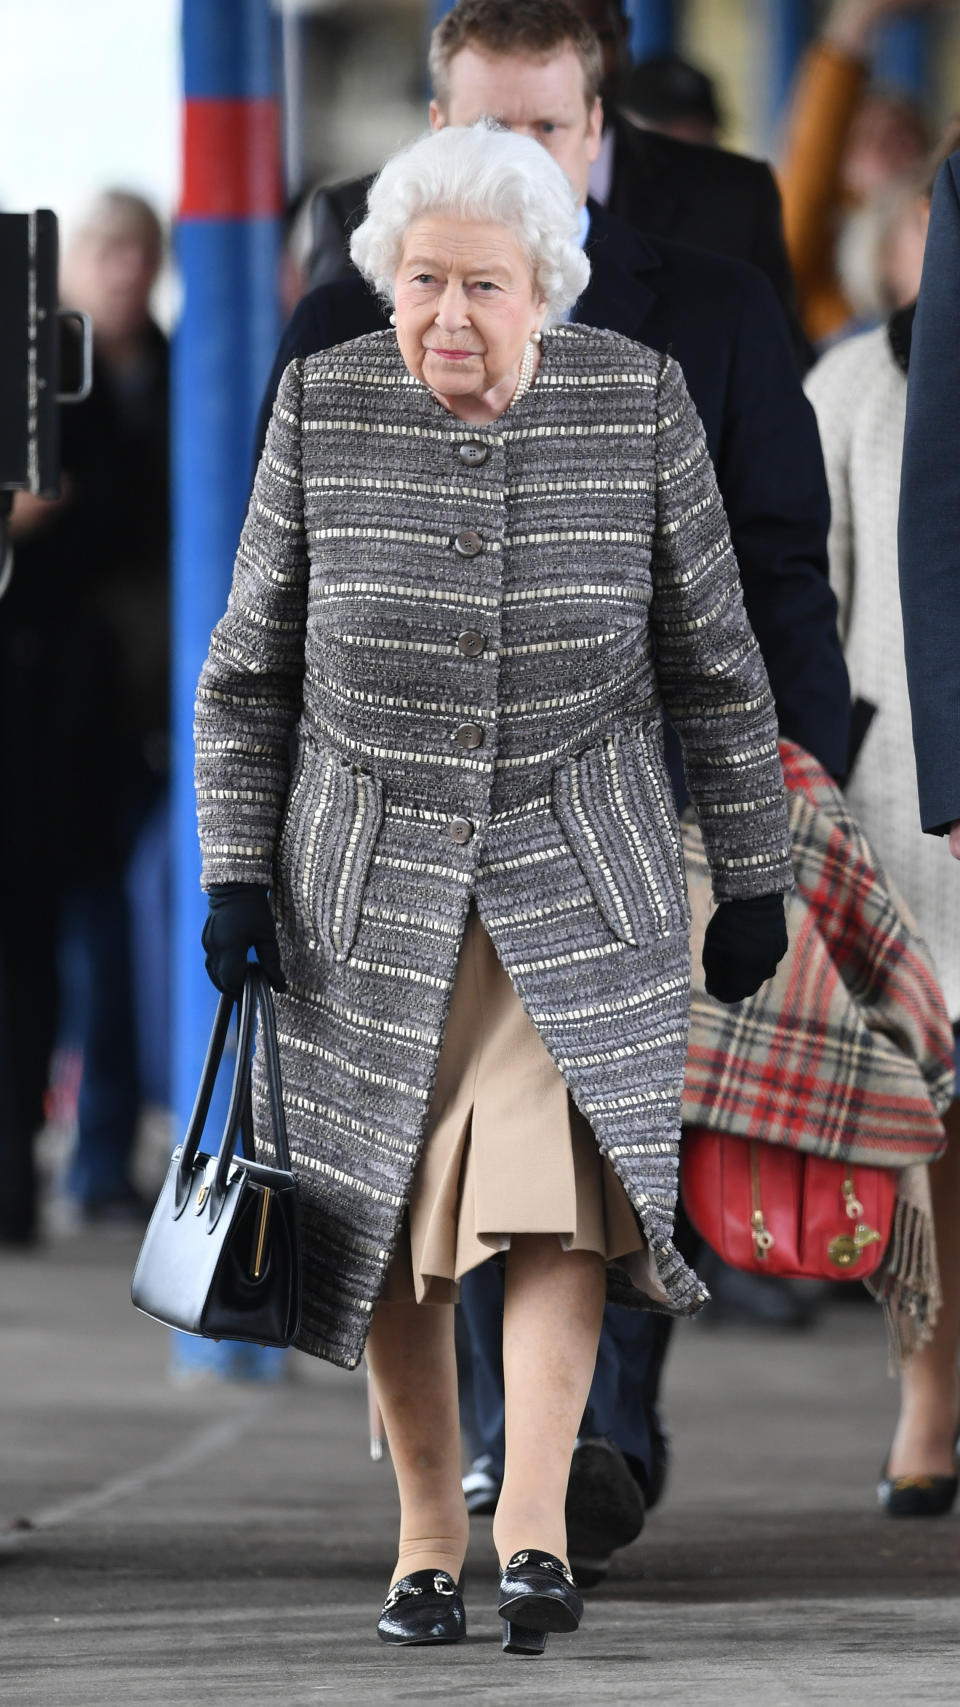 The Queen kept warm in a grey boucle coat [Photo: PA]